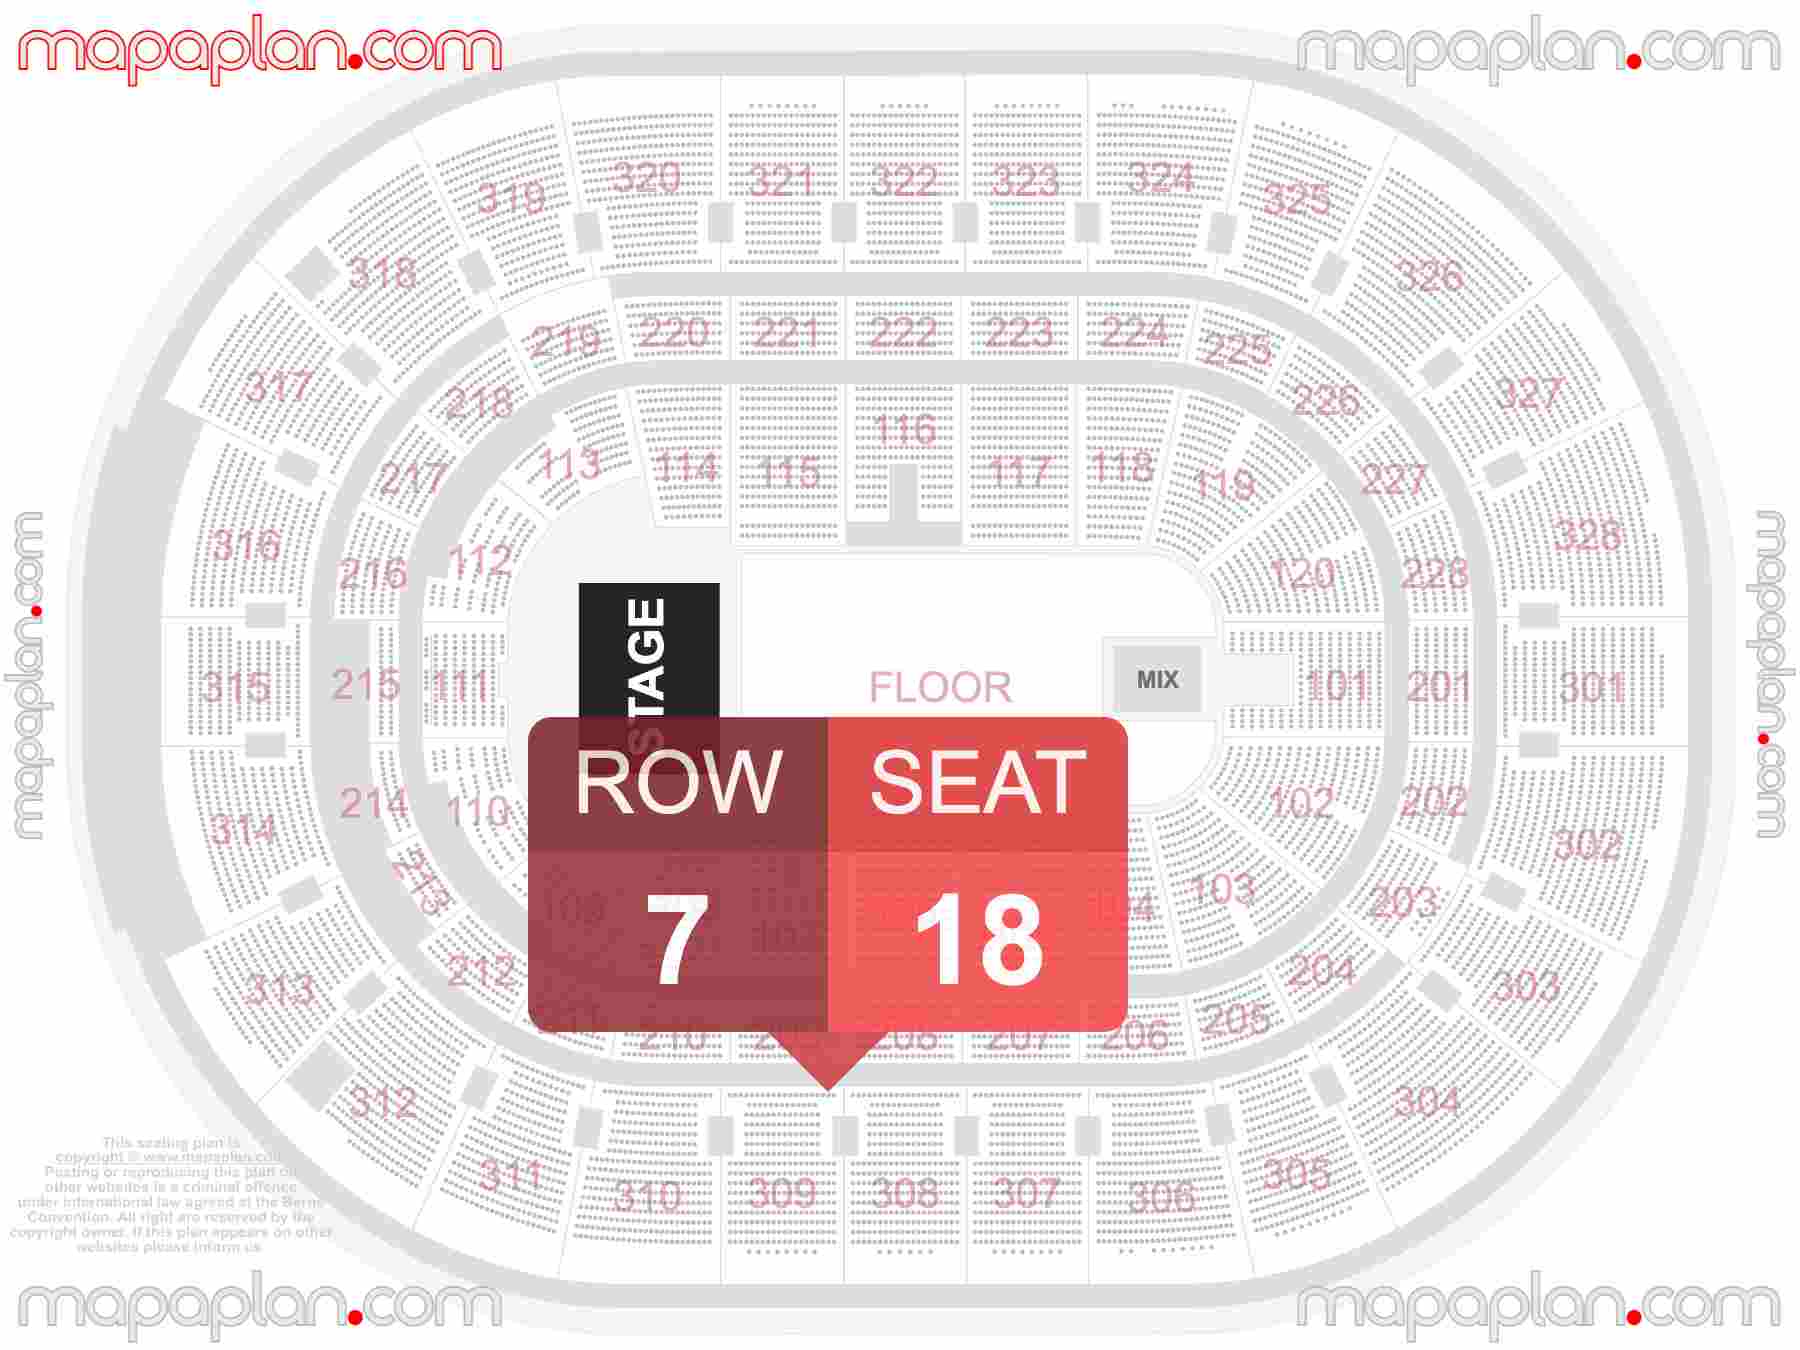 Ottawa Canadian Tire Centre seating map Concert with floor general admission standing interactive seating checker map chart showing seat numbers per row - Ticket prices sections review diagram